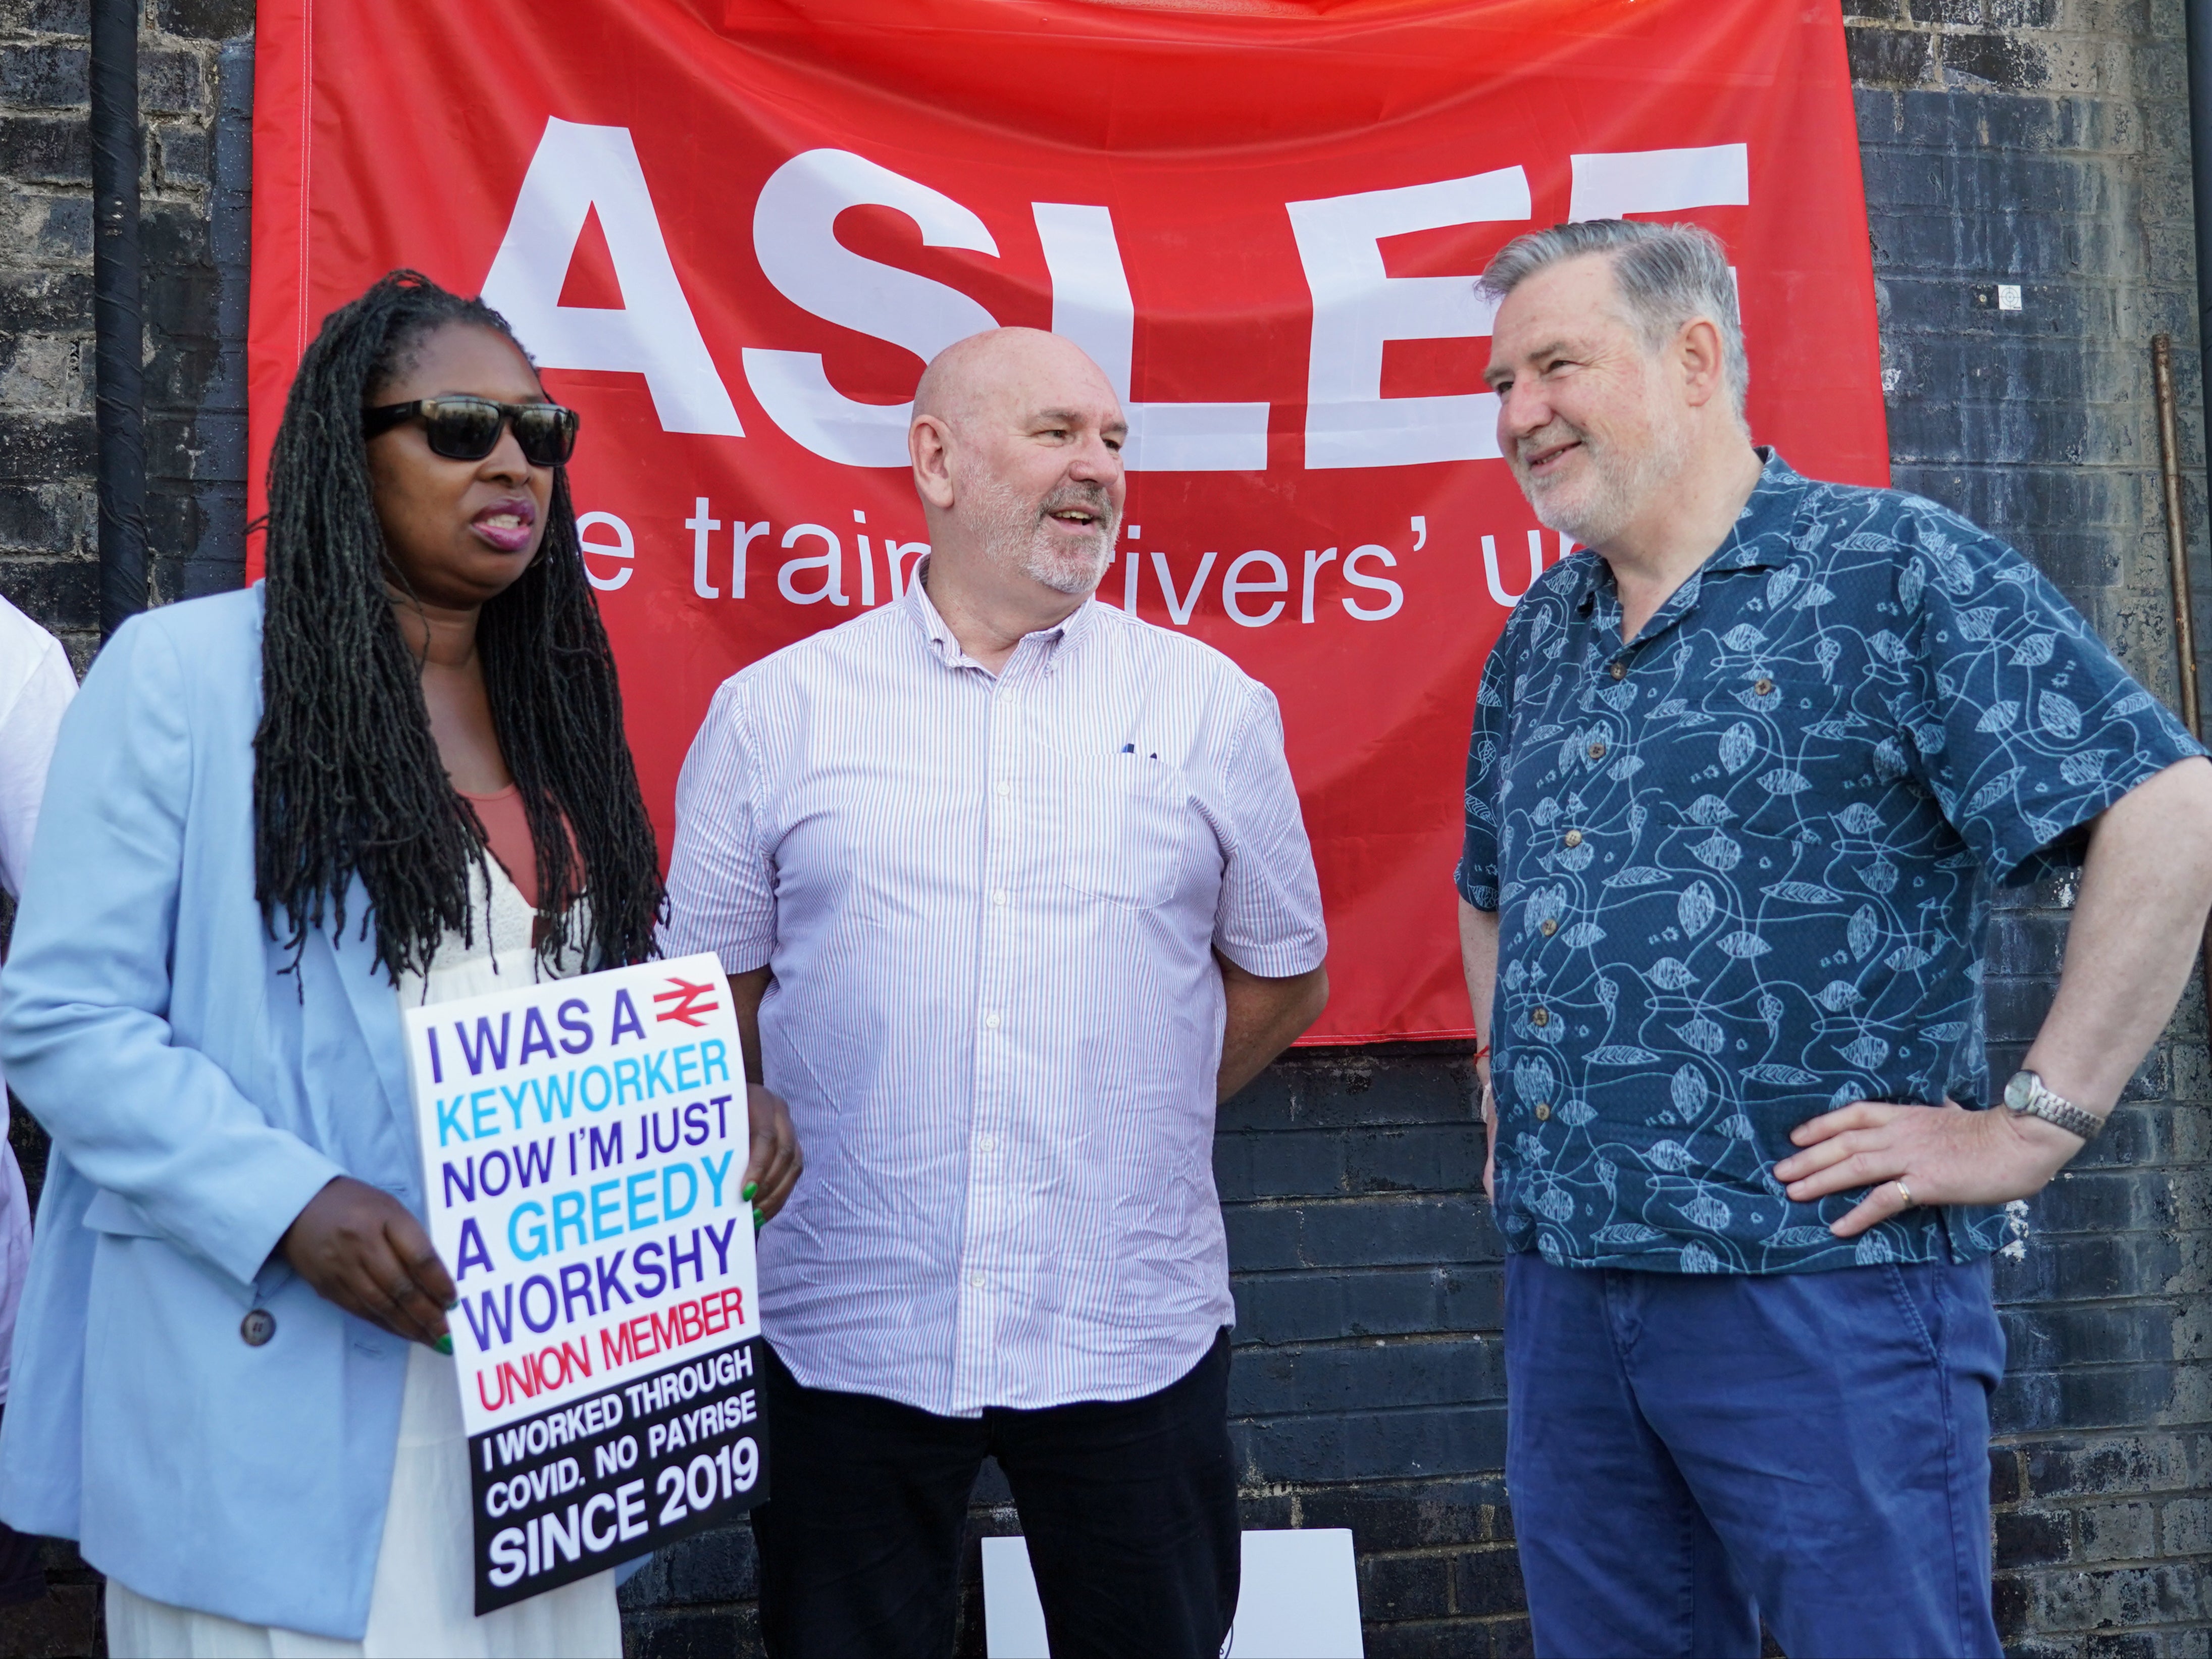 Labour MPs Dawn Butler (left) and Barry Gardiner (right) with Aslef’s general secretary Mick Whelan (centre)